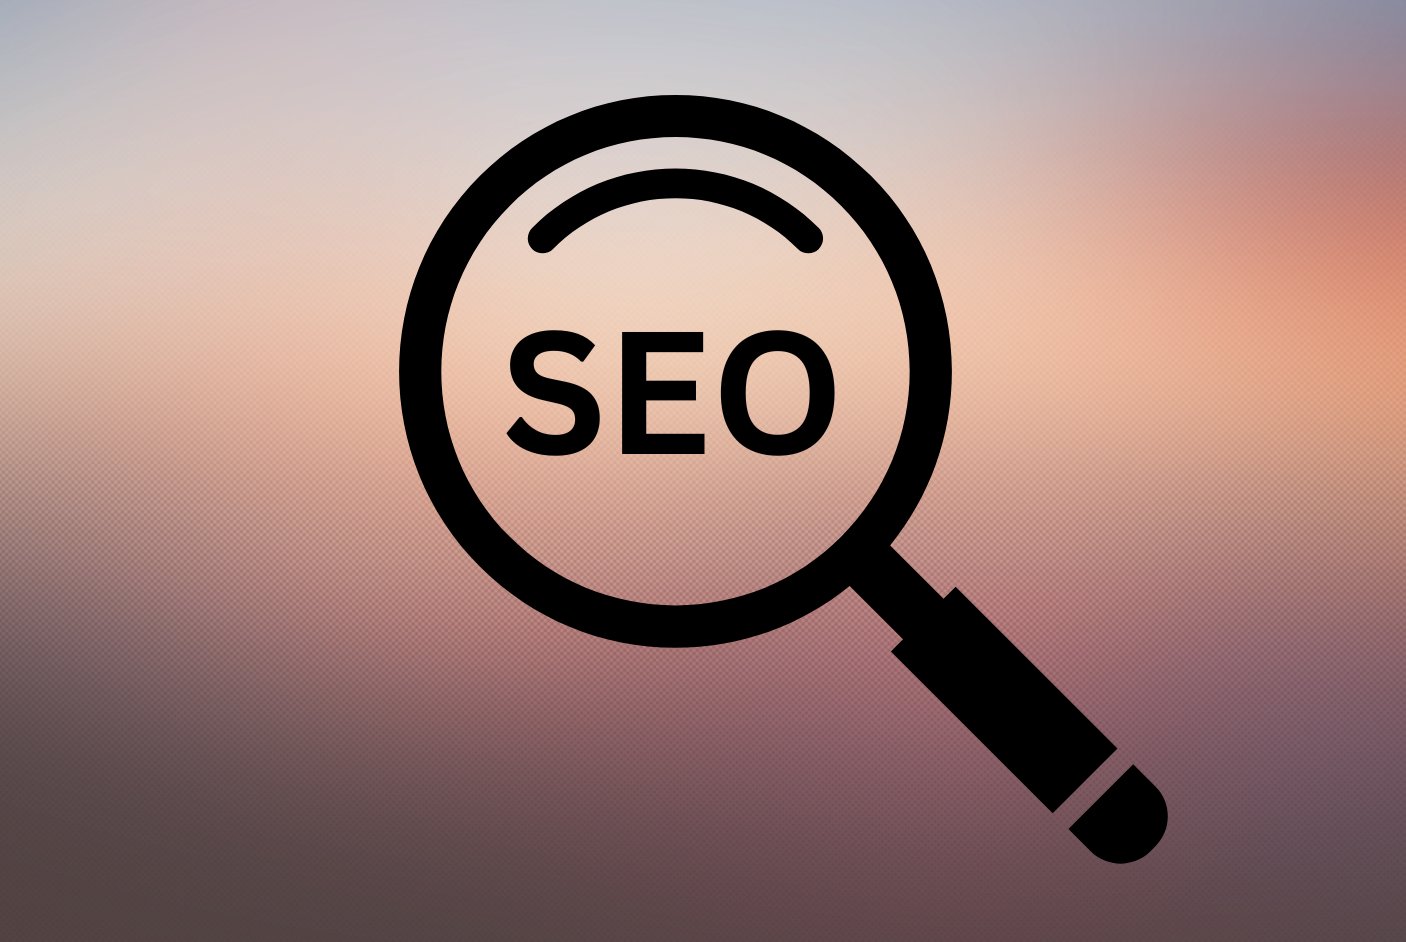 "SEO" in the middle of a magnifying glass against a gradient background.